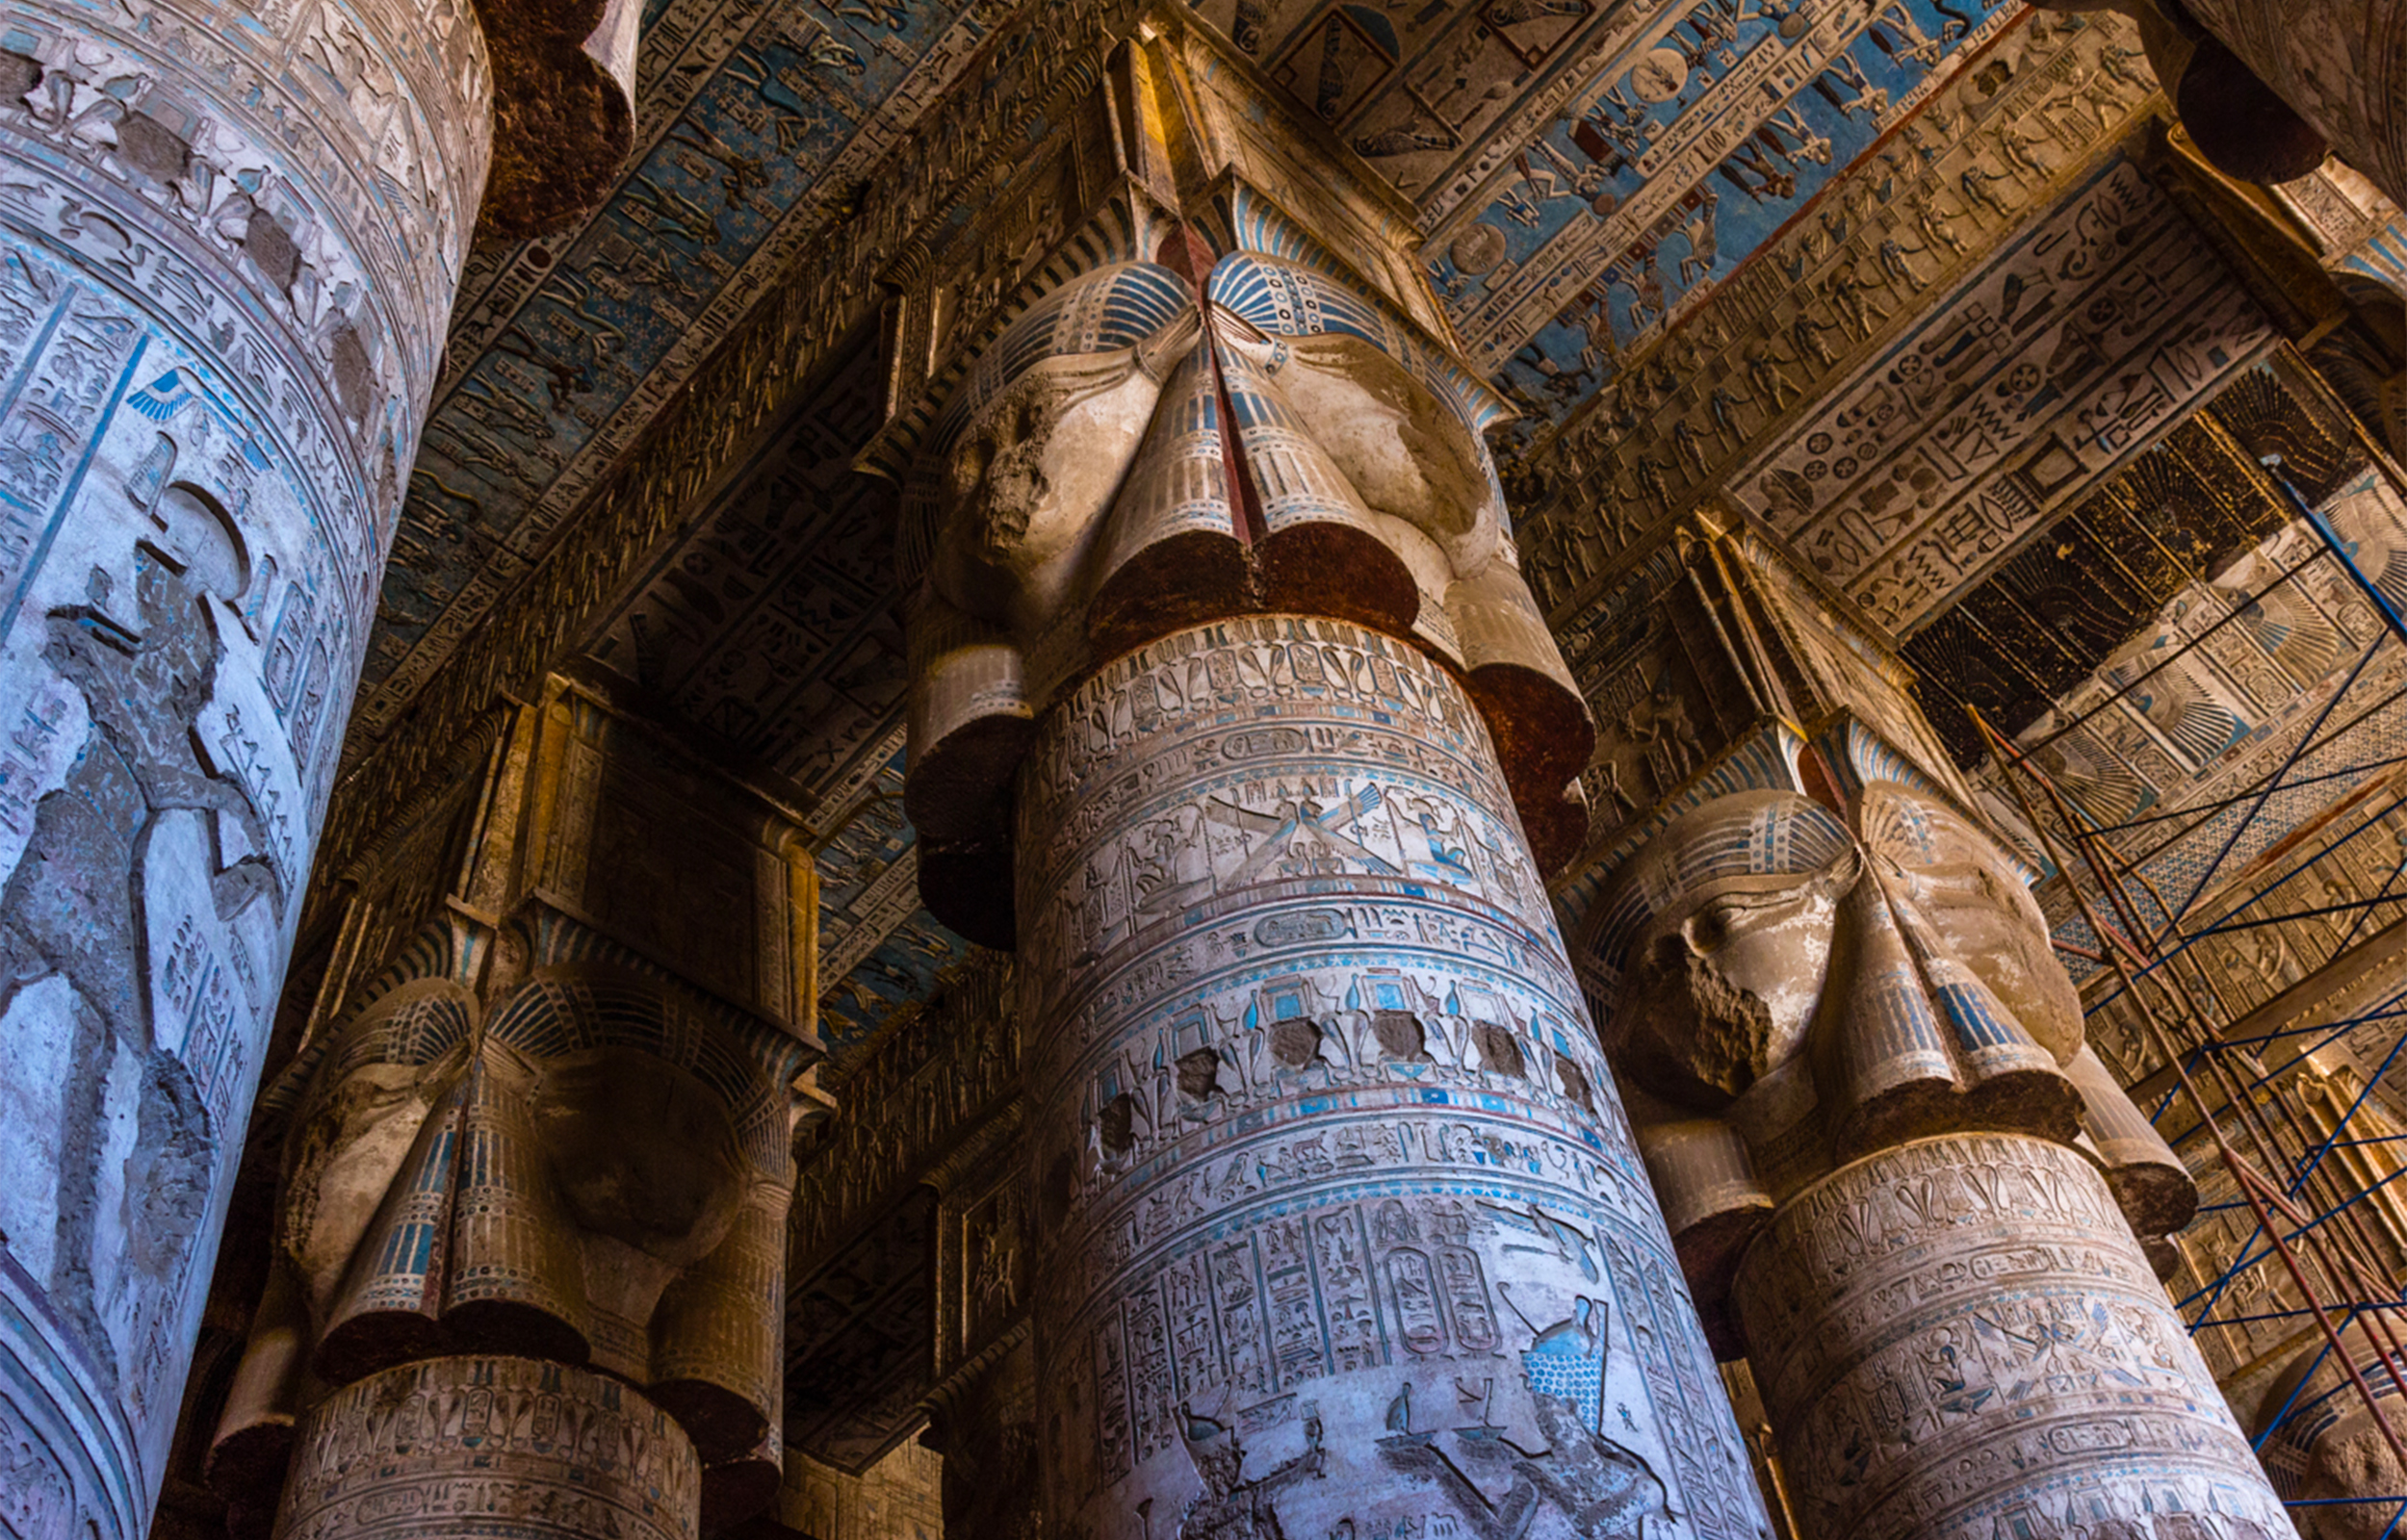 The Wondrous Genres of Egyptian Sightseeing